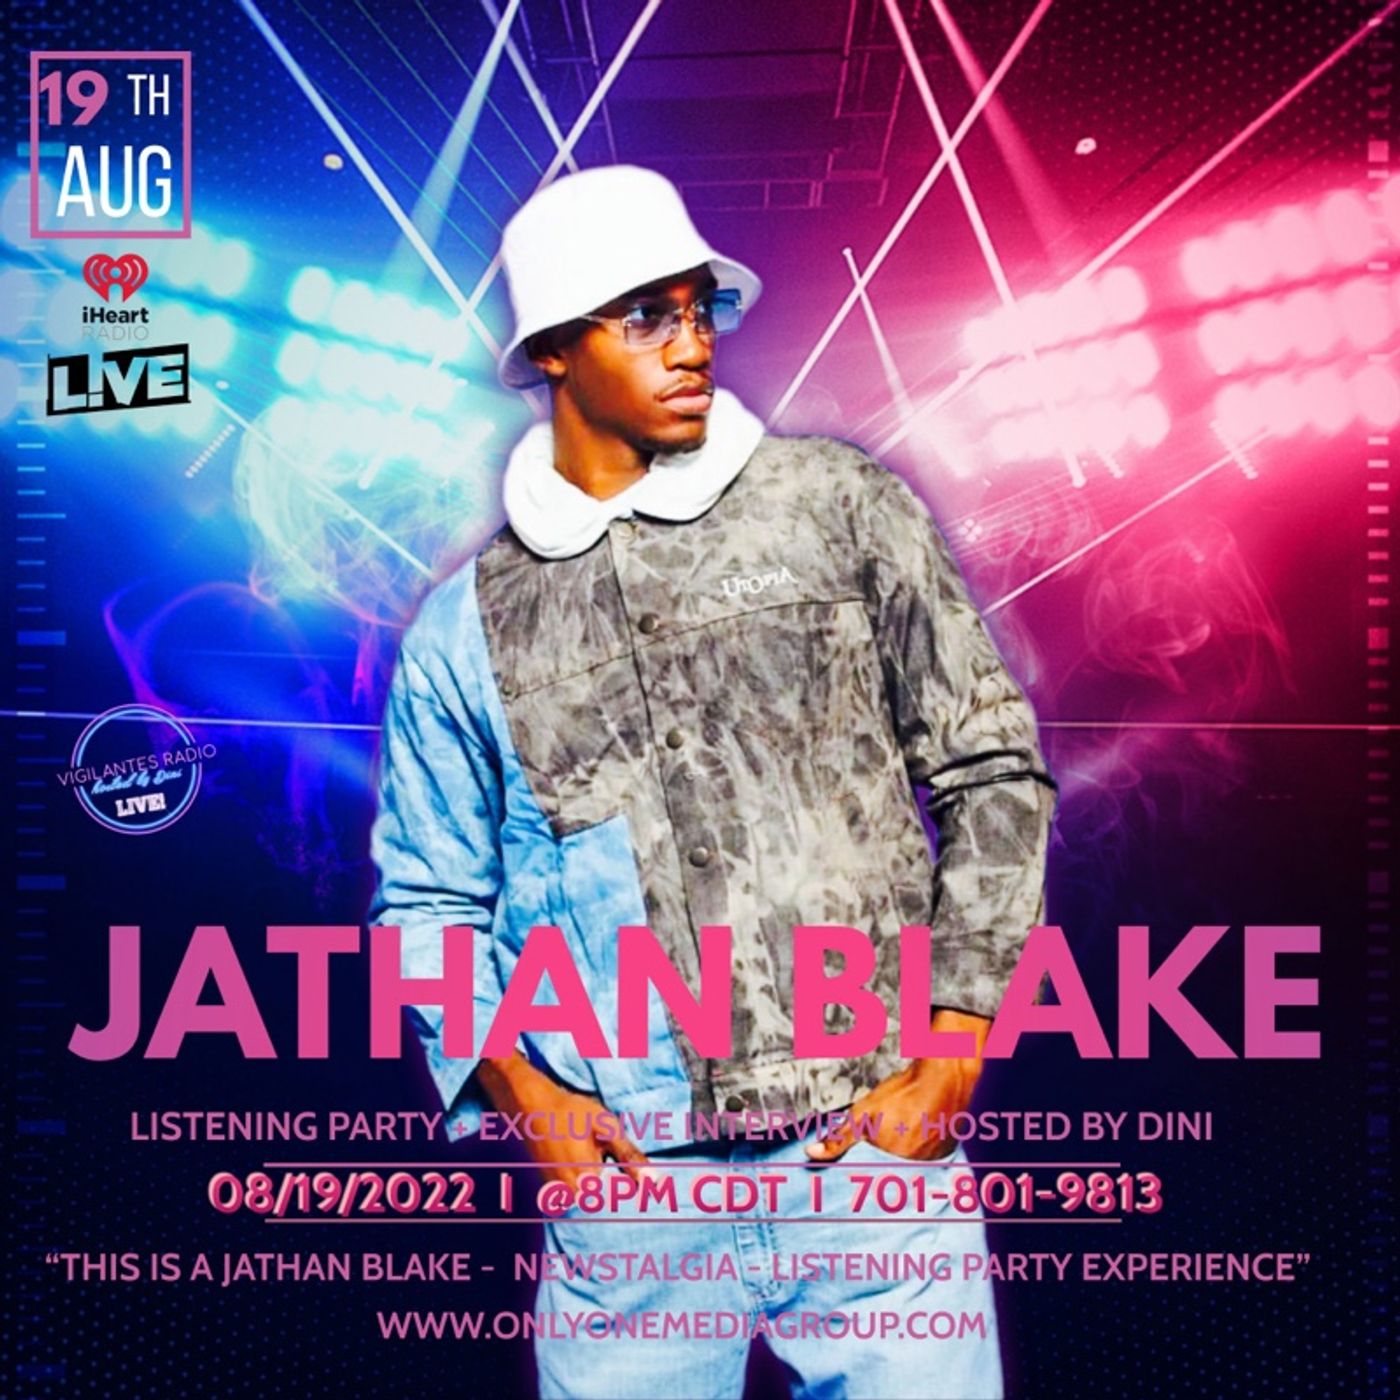 The Jathan Blake Listening Party. Image